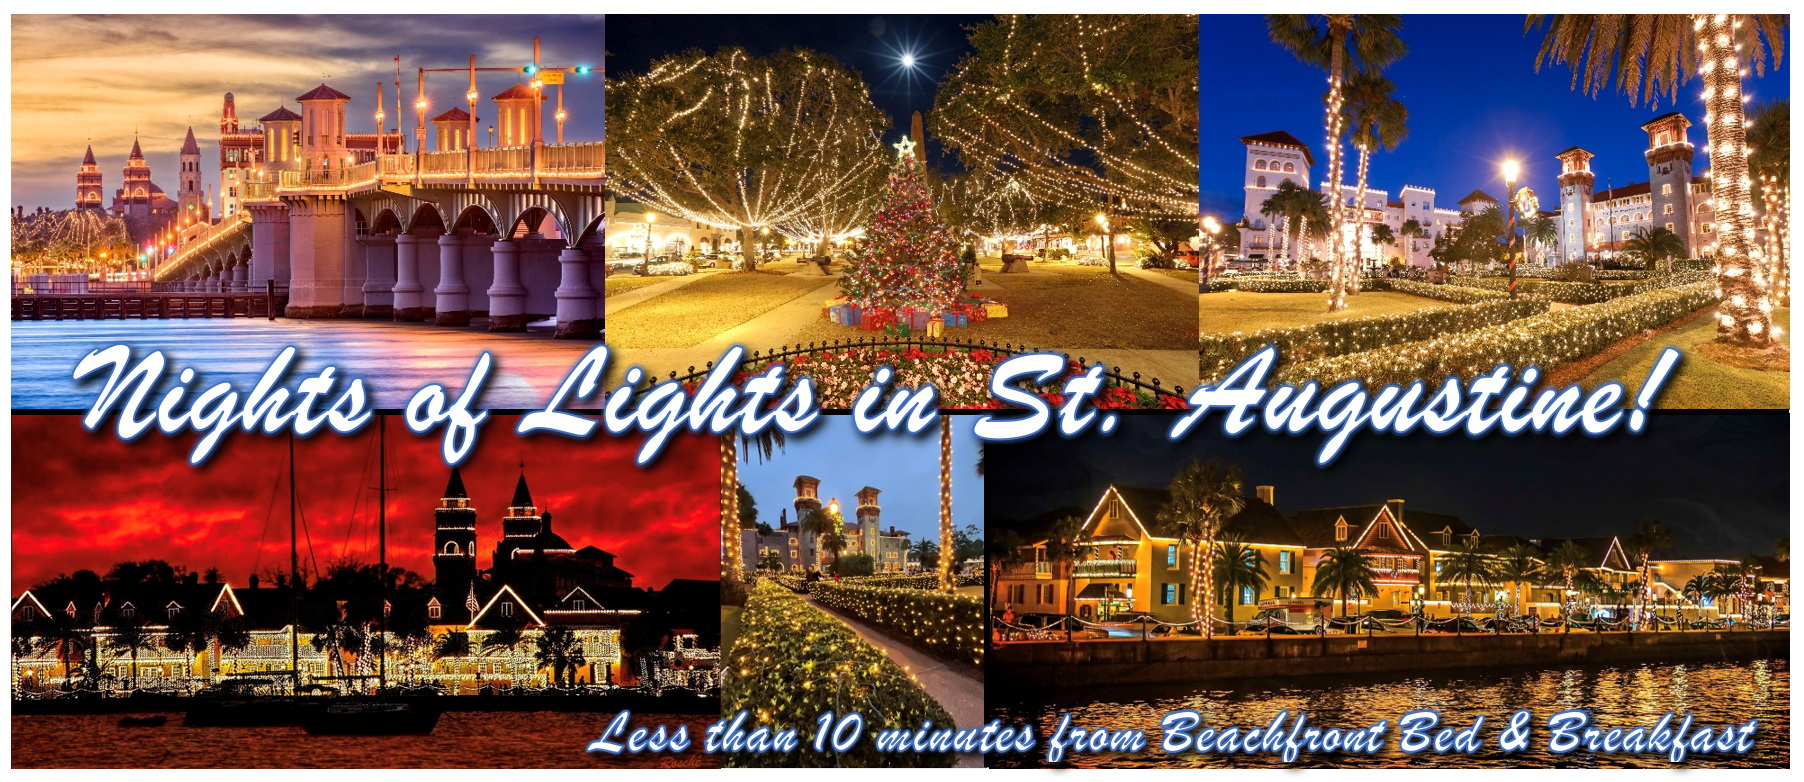 Nights of Lights celebration in St. Augustine near Beachfront Bed and Breakfast